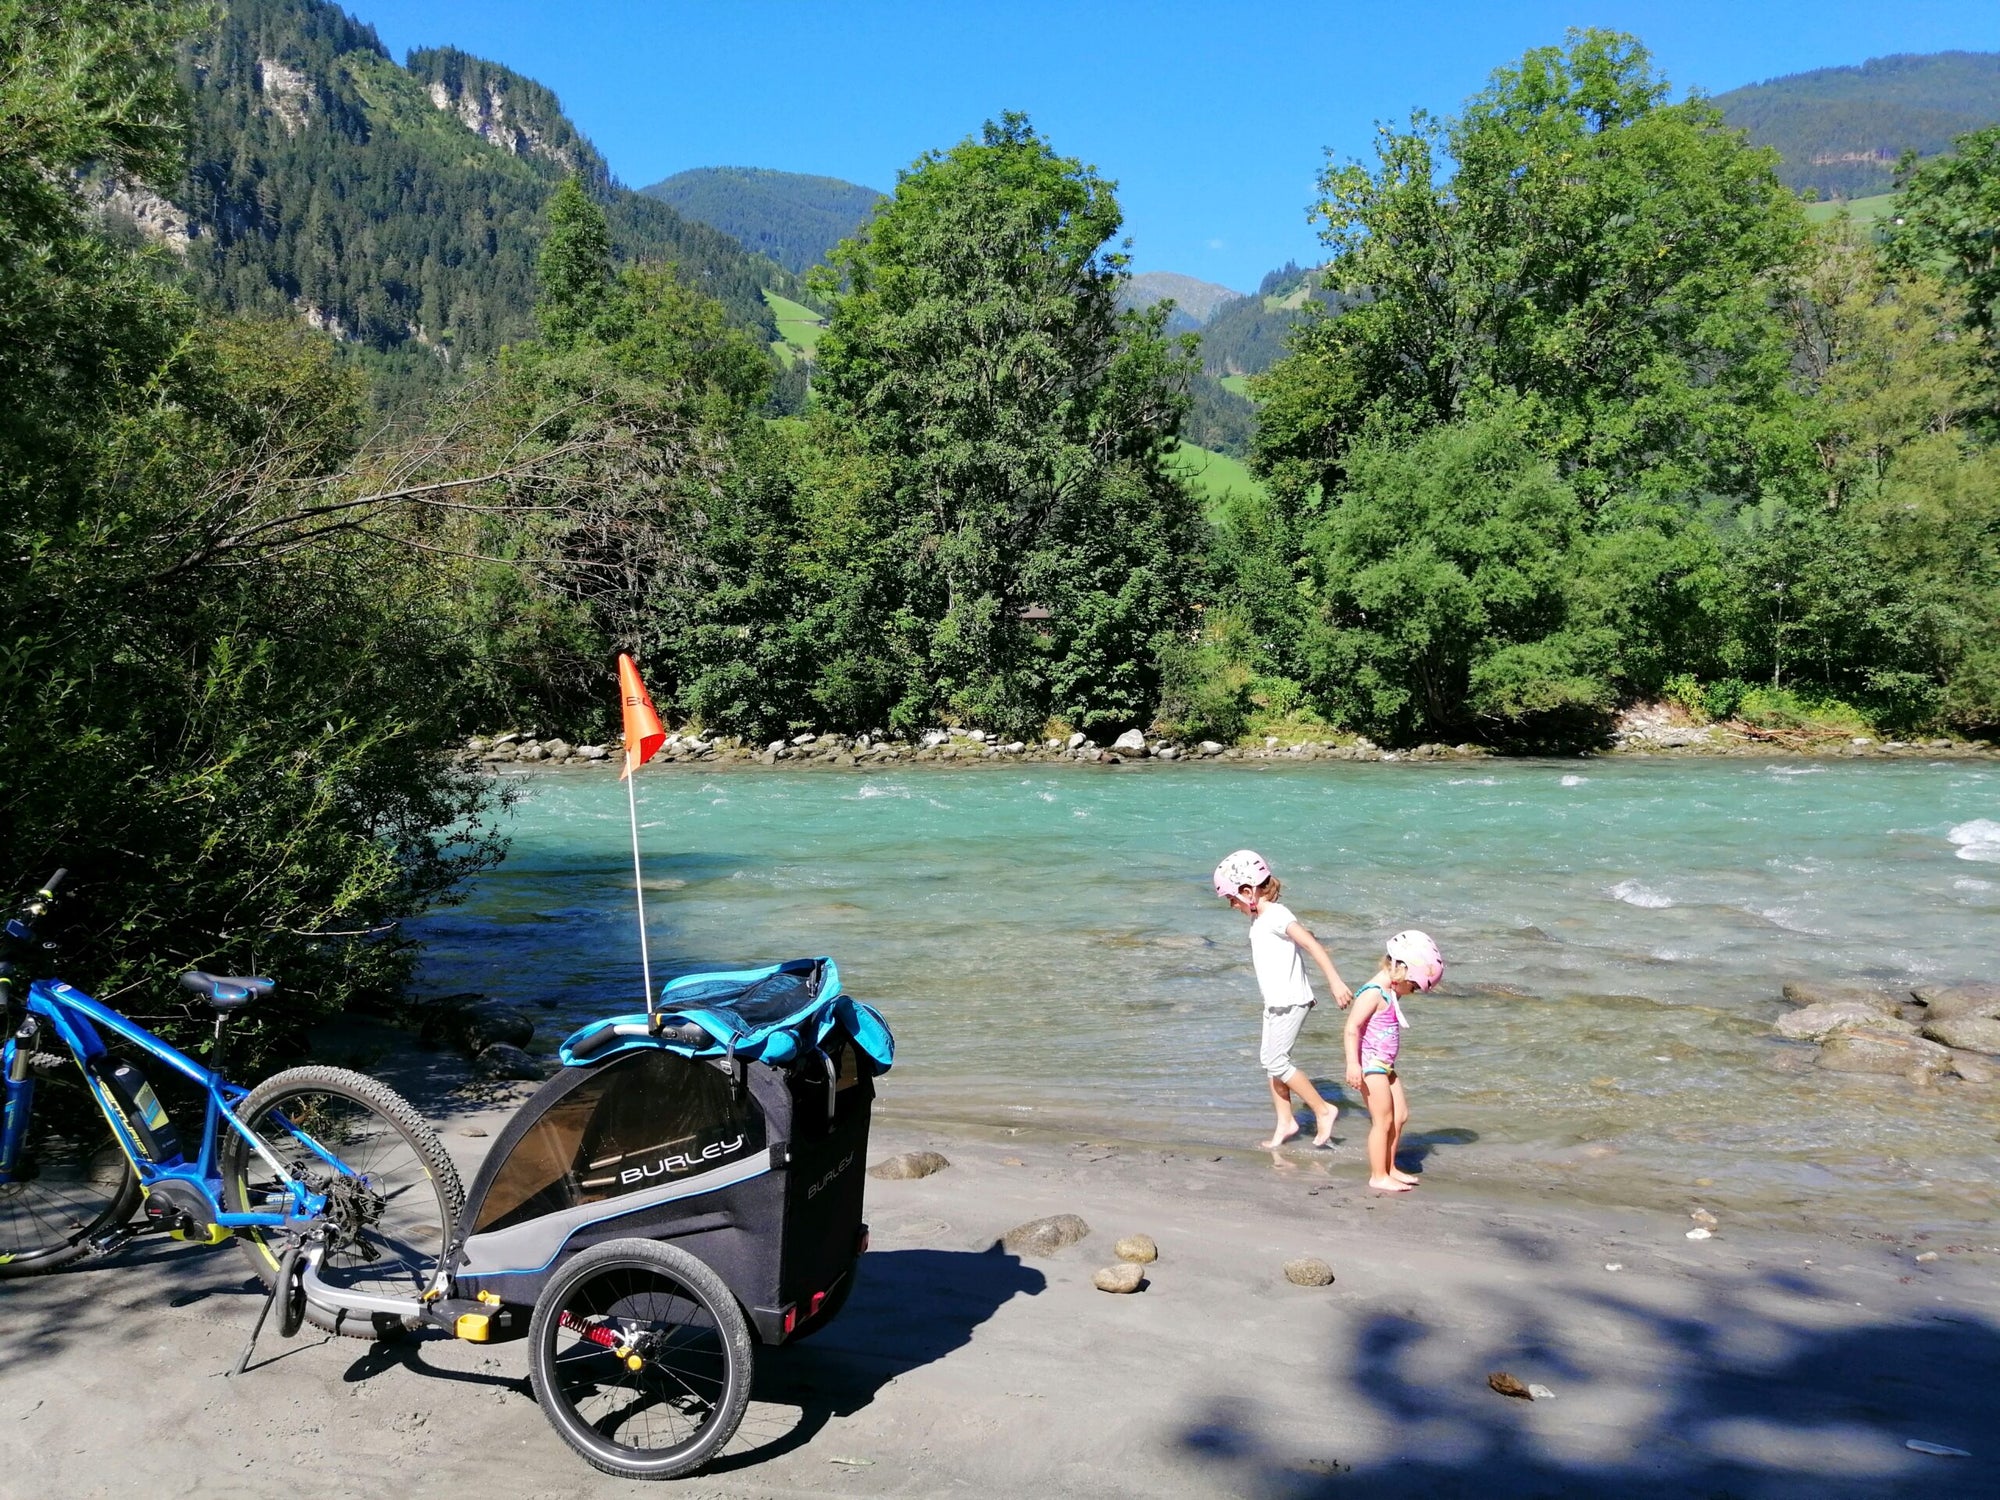 two young girls wading in river. bicycle with kid bike trailer attached parked alongside river